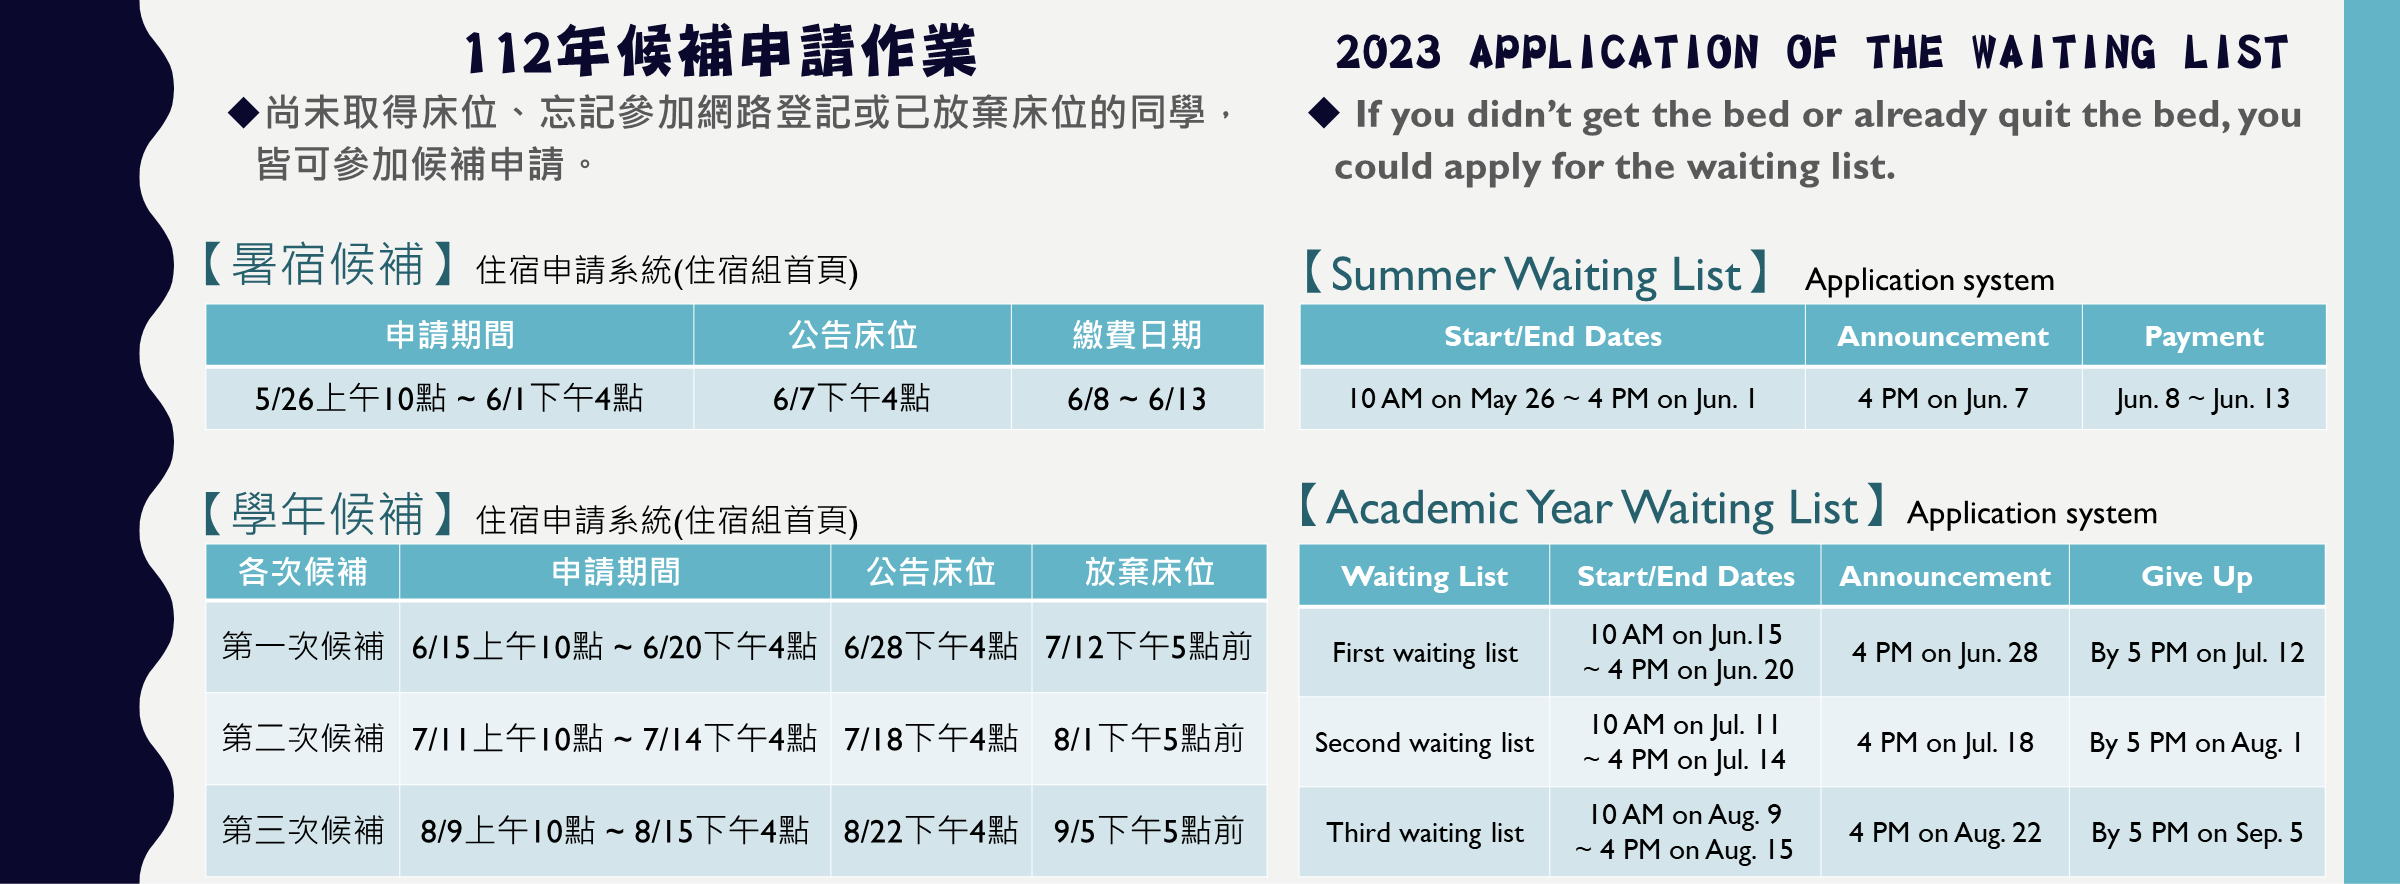 2023 Application of the waiting list